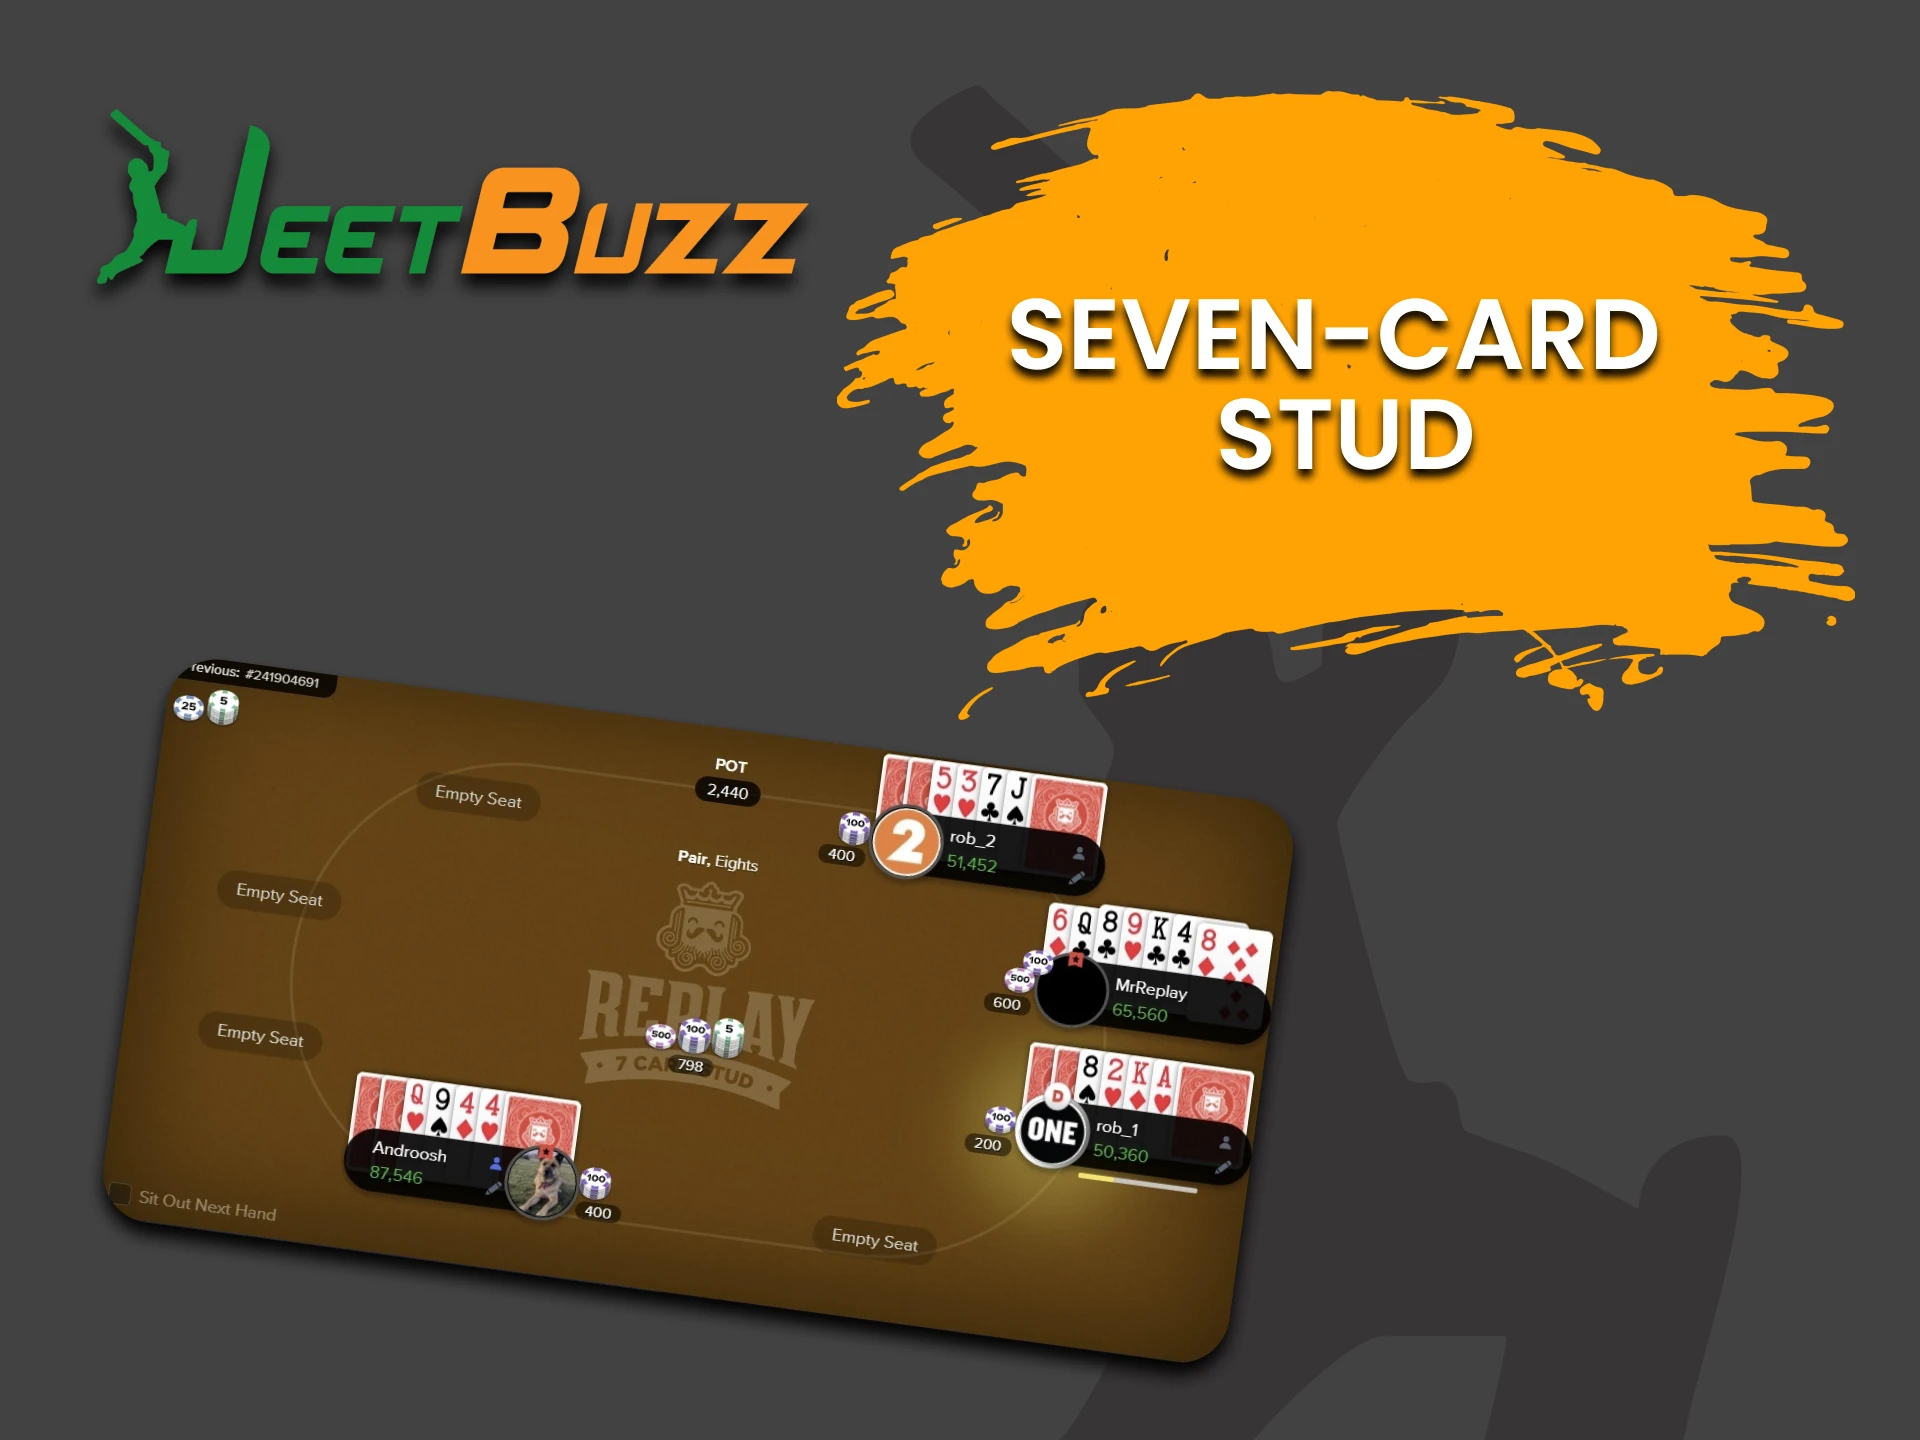 To play Poker on JeetBuzz, choose Seven-Card Stud.